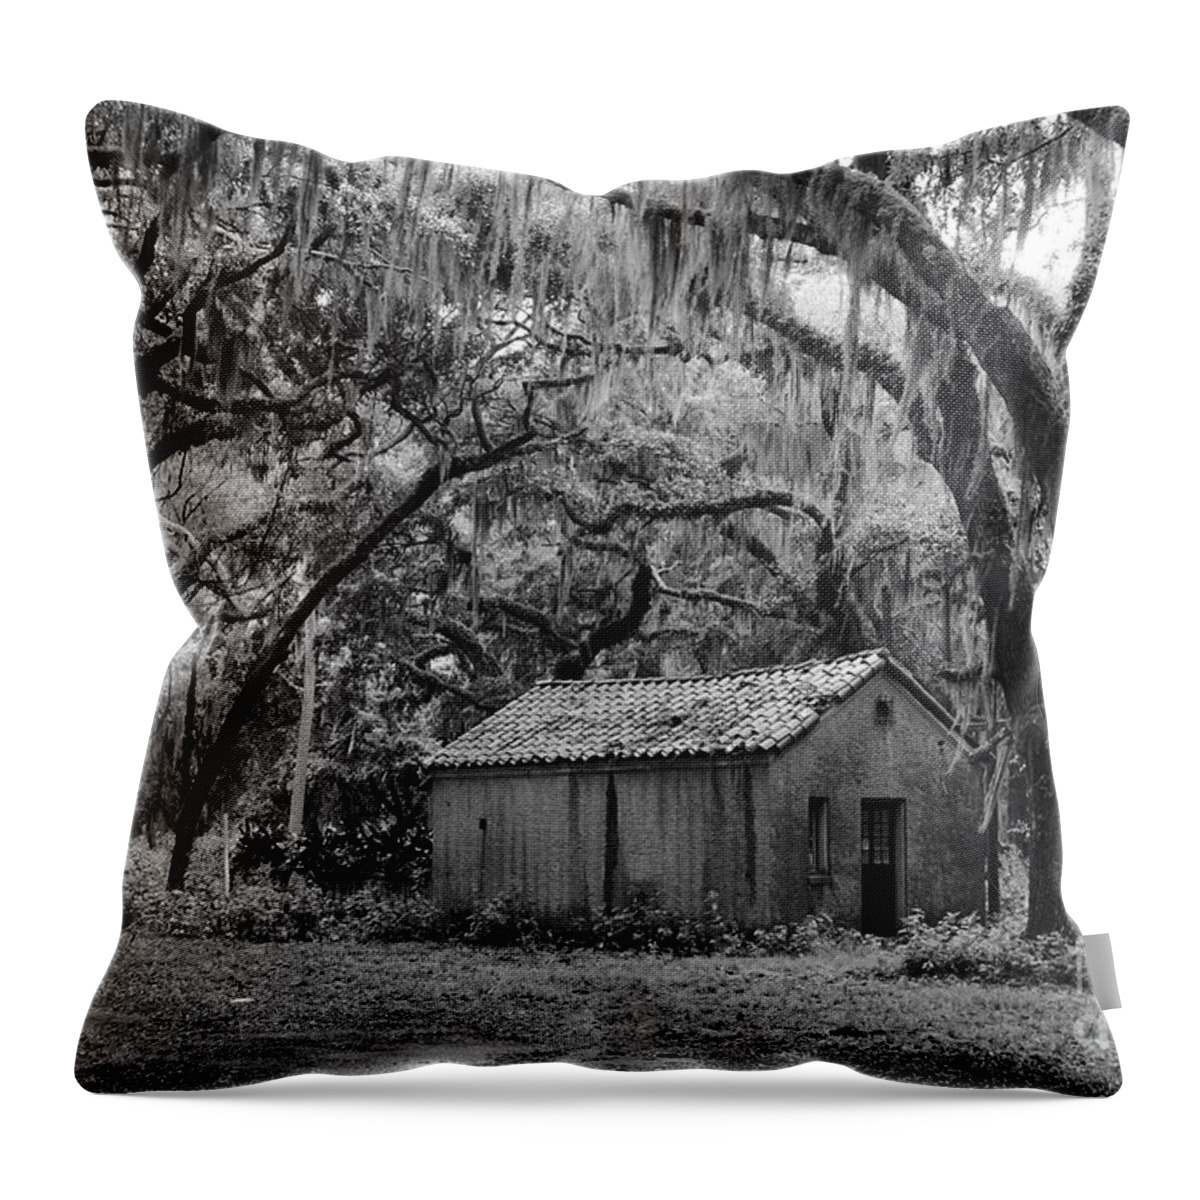 Live Throw Pillow featuring the photograph Amongst The Live Oaks by Andre Turner